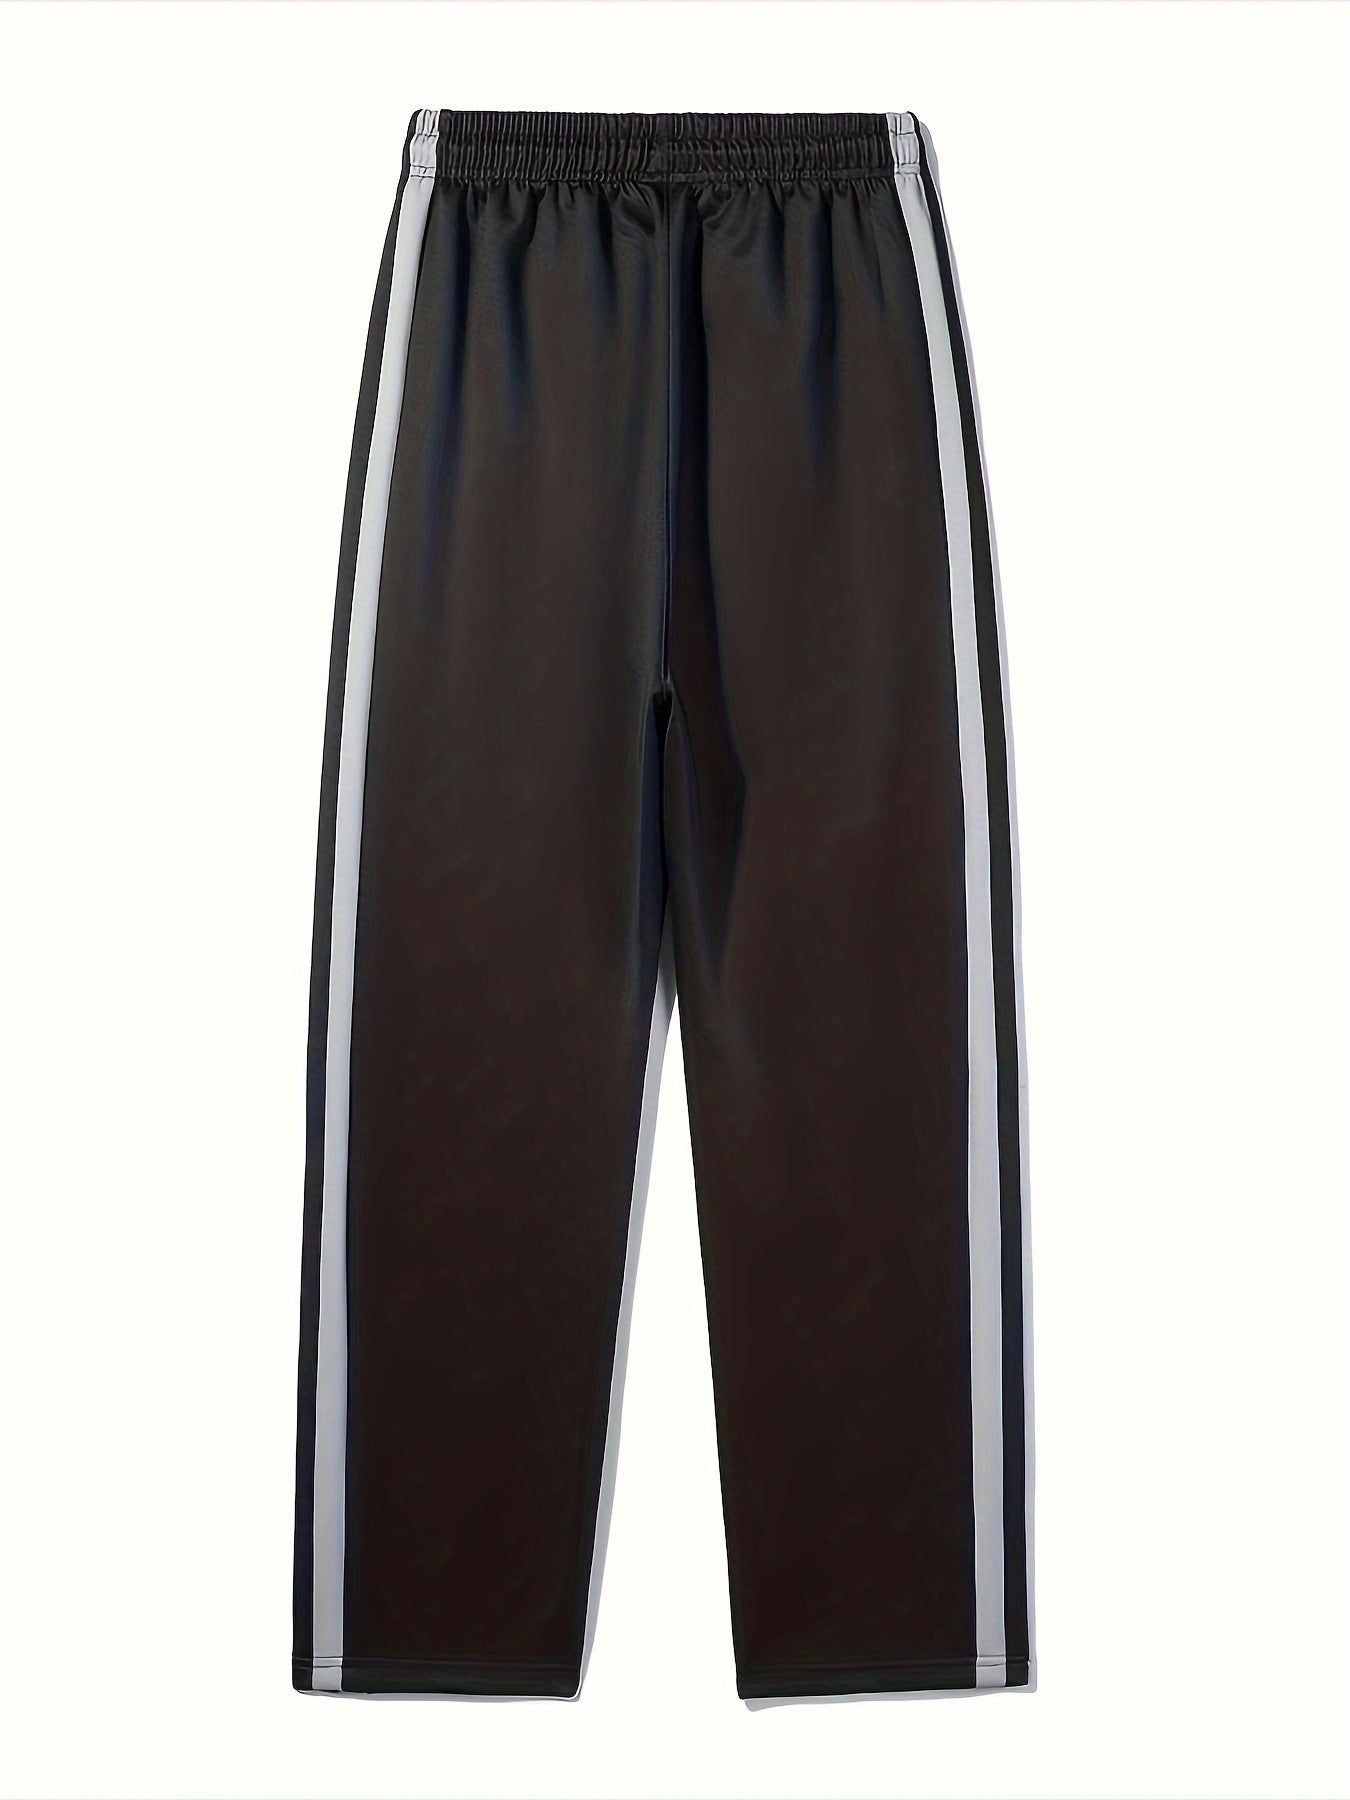 Men's Stylish Loose Striped Pattern Trousers with Pockets, Casual Breathable Drawstring Trousers 